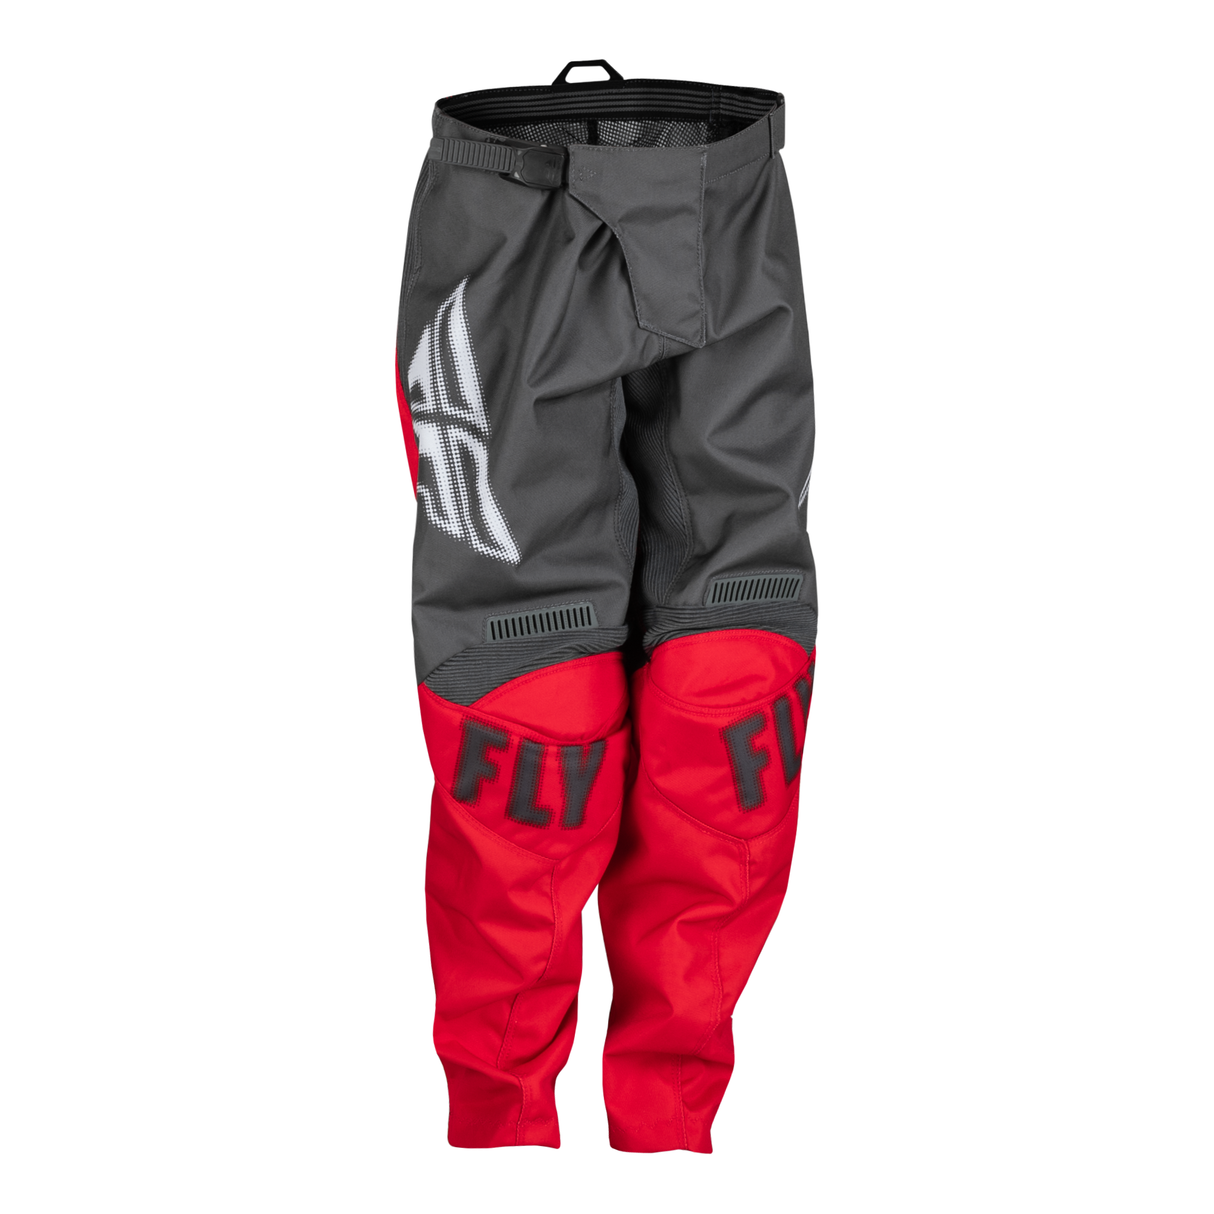 FLY 2023 YOUTH F-16 PANT GREY/RED